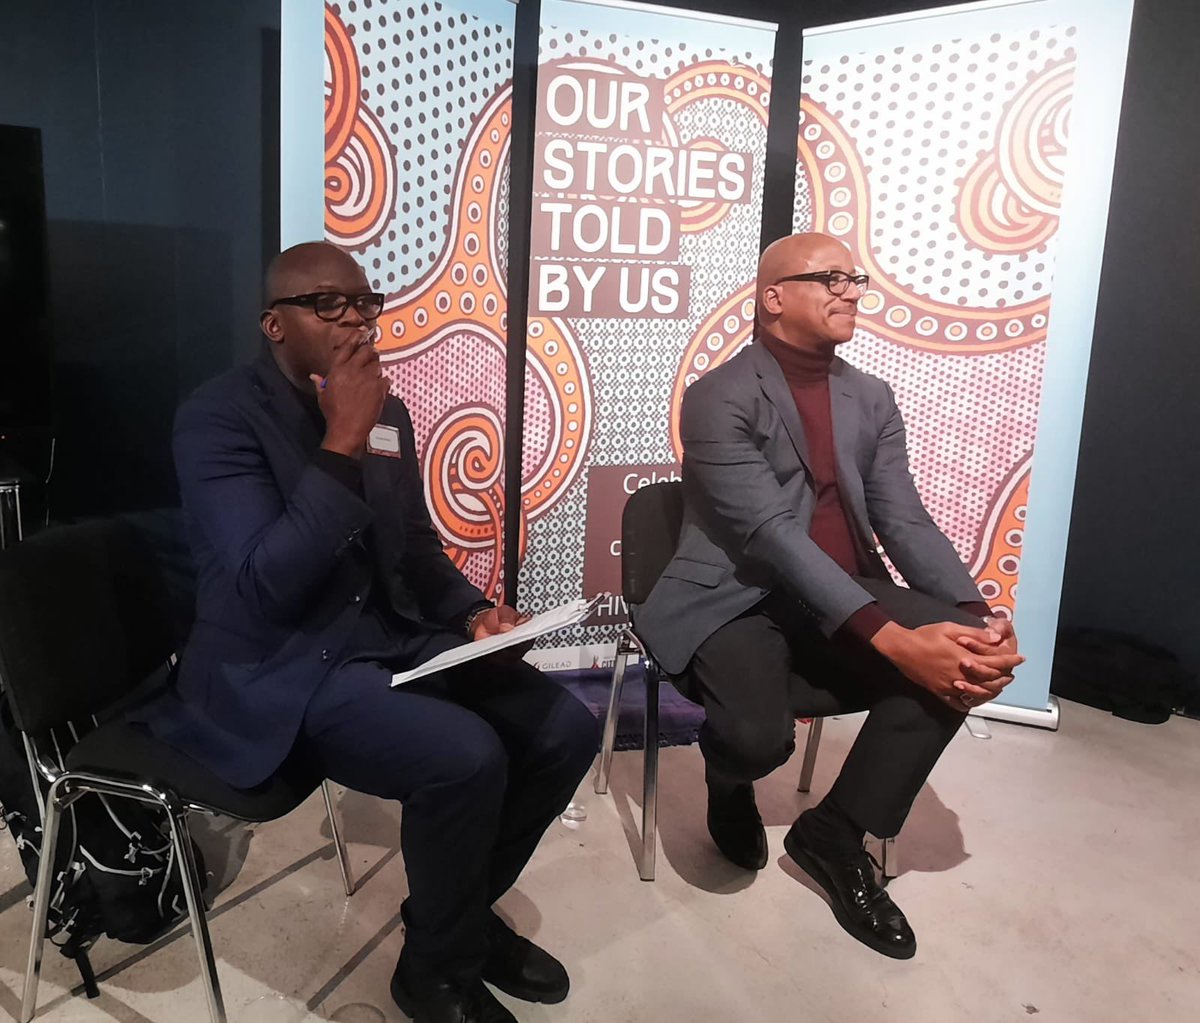 We now welcome Dr Ade Fakoya to lead a Q/A session with @ProfKevinFenton #OurStories #BlackLeaders